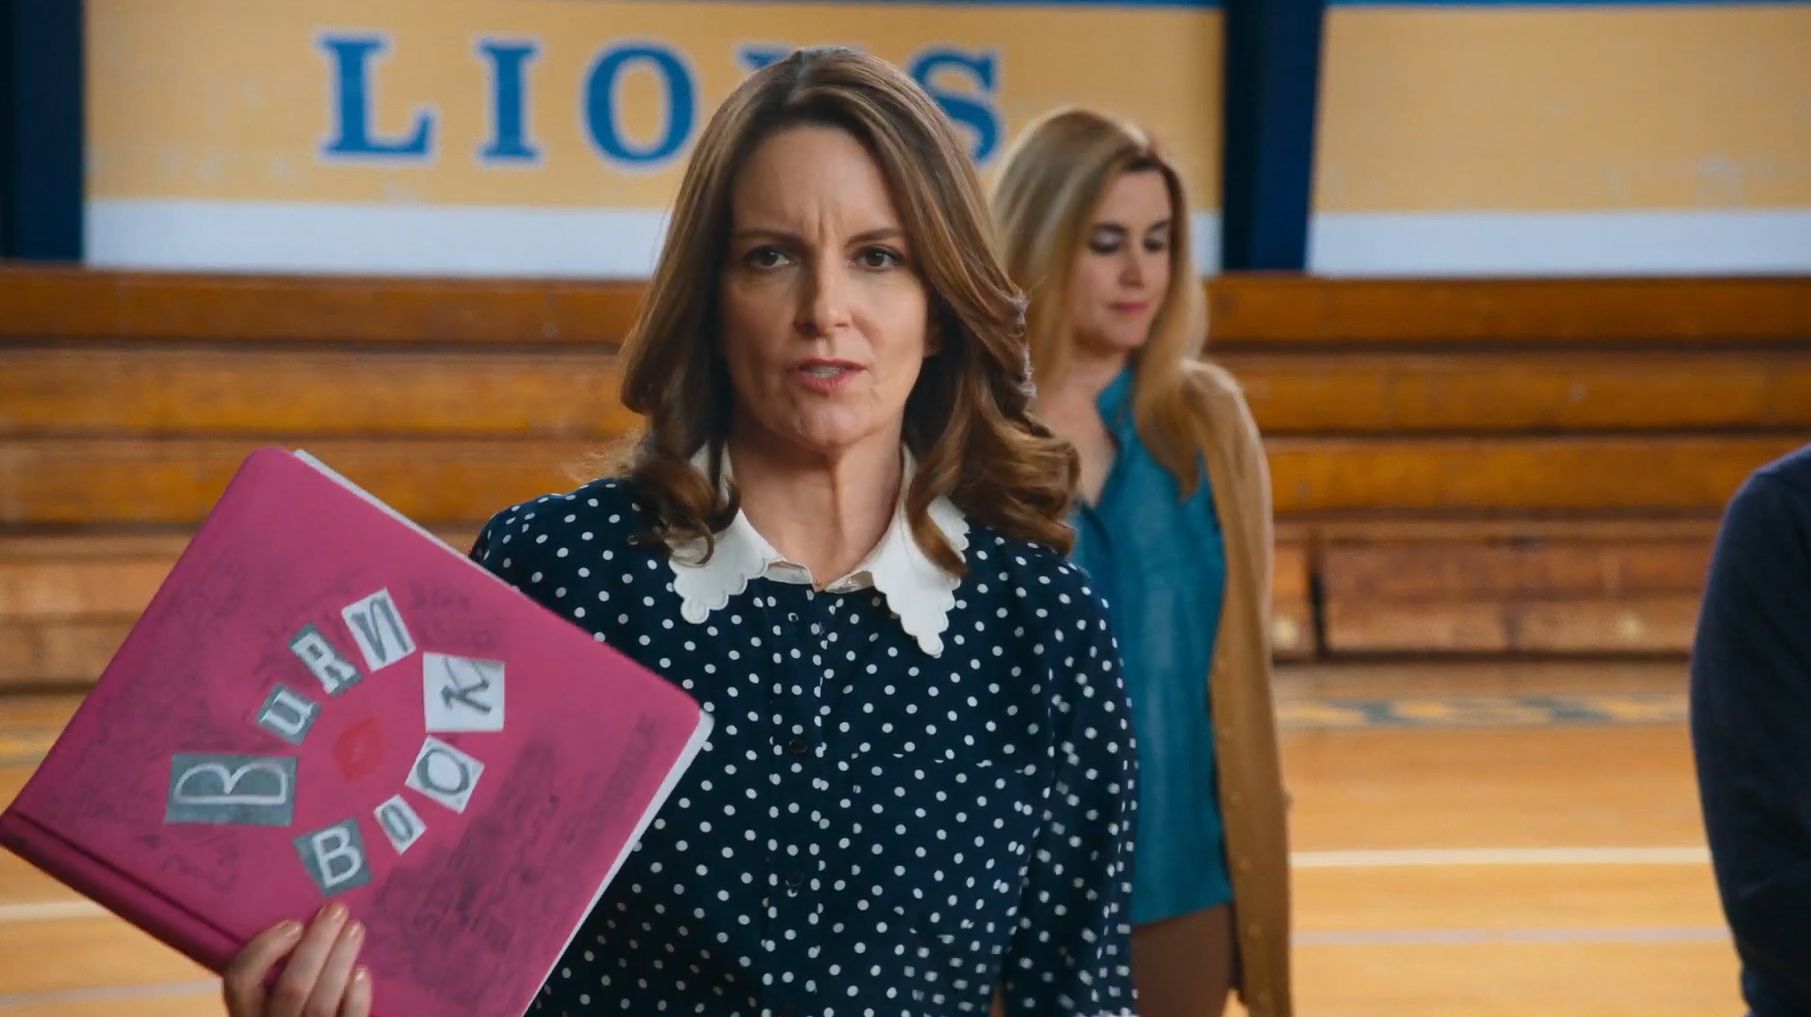 Mean Girls: Why a nearly 20-year-old movie is trending in 2023, Article